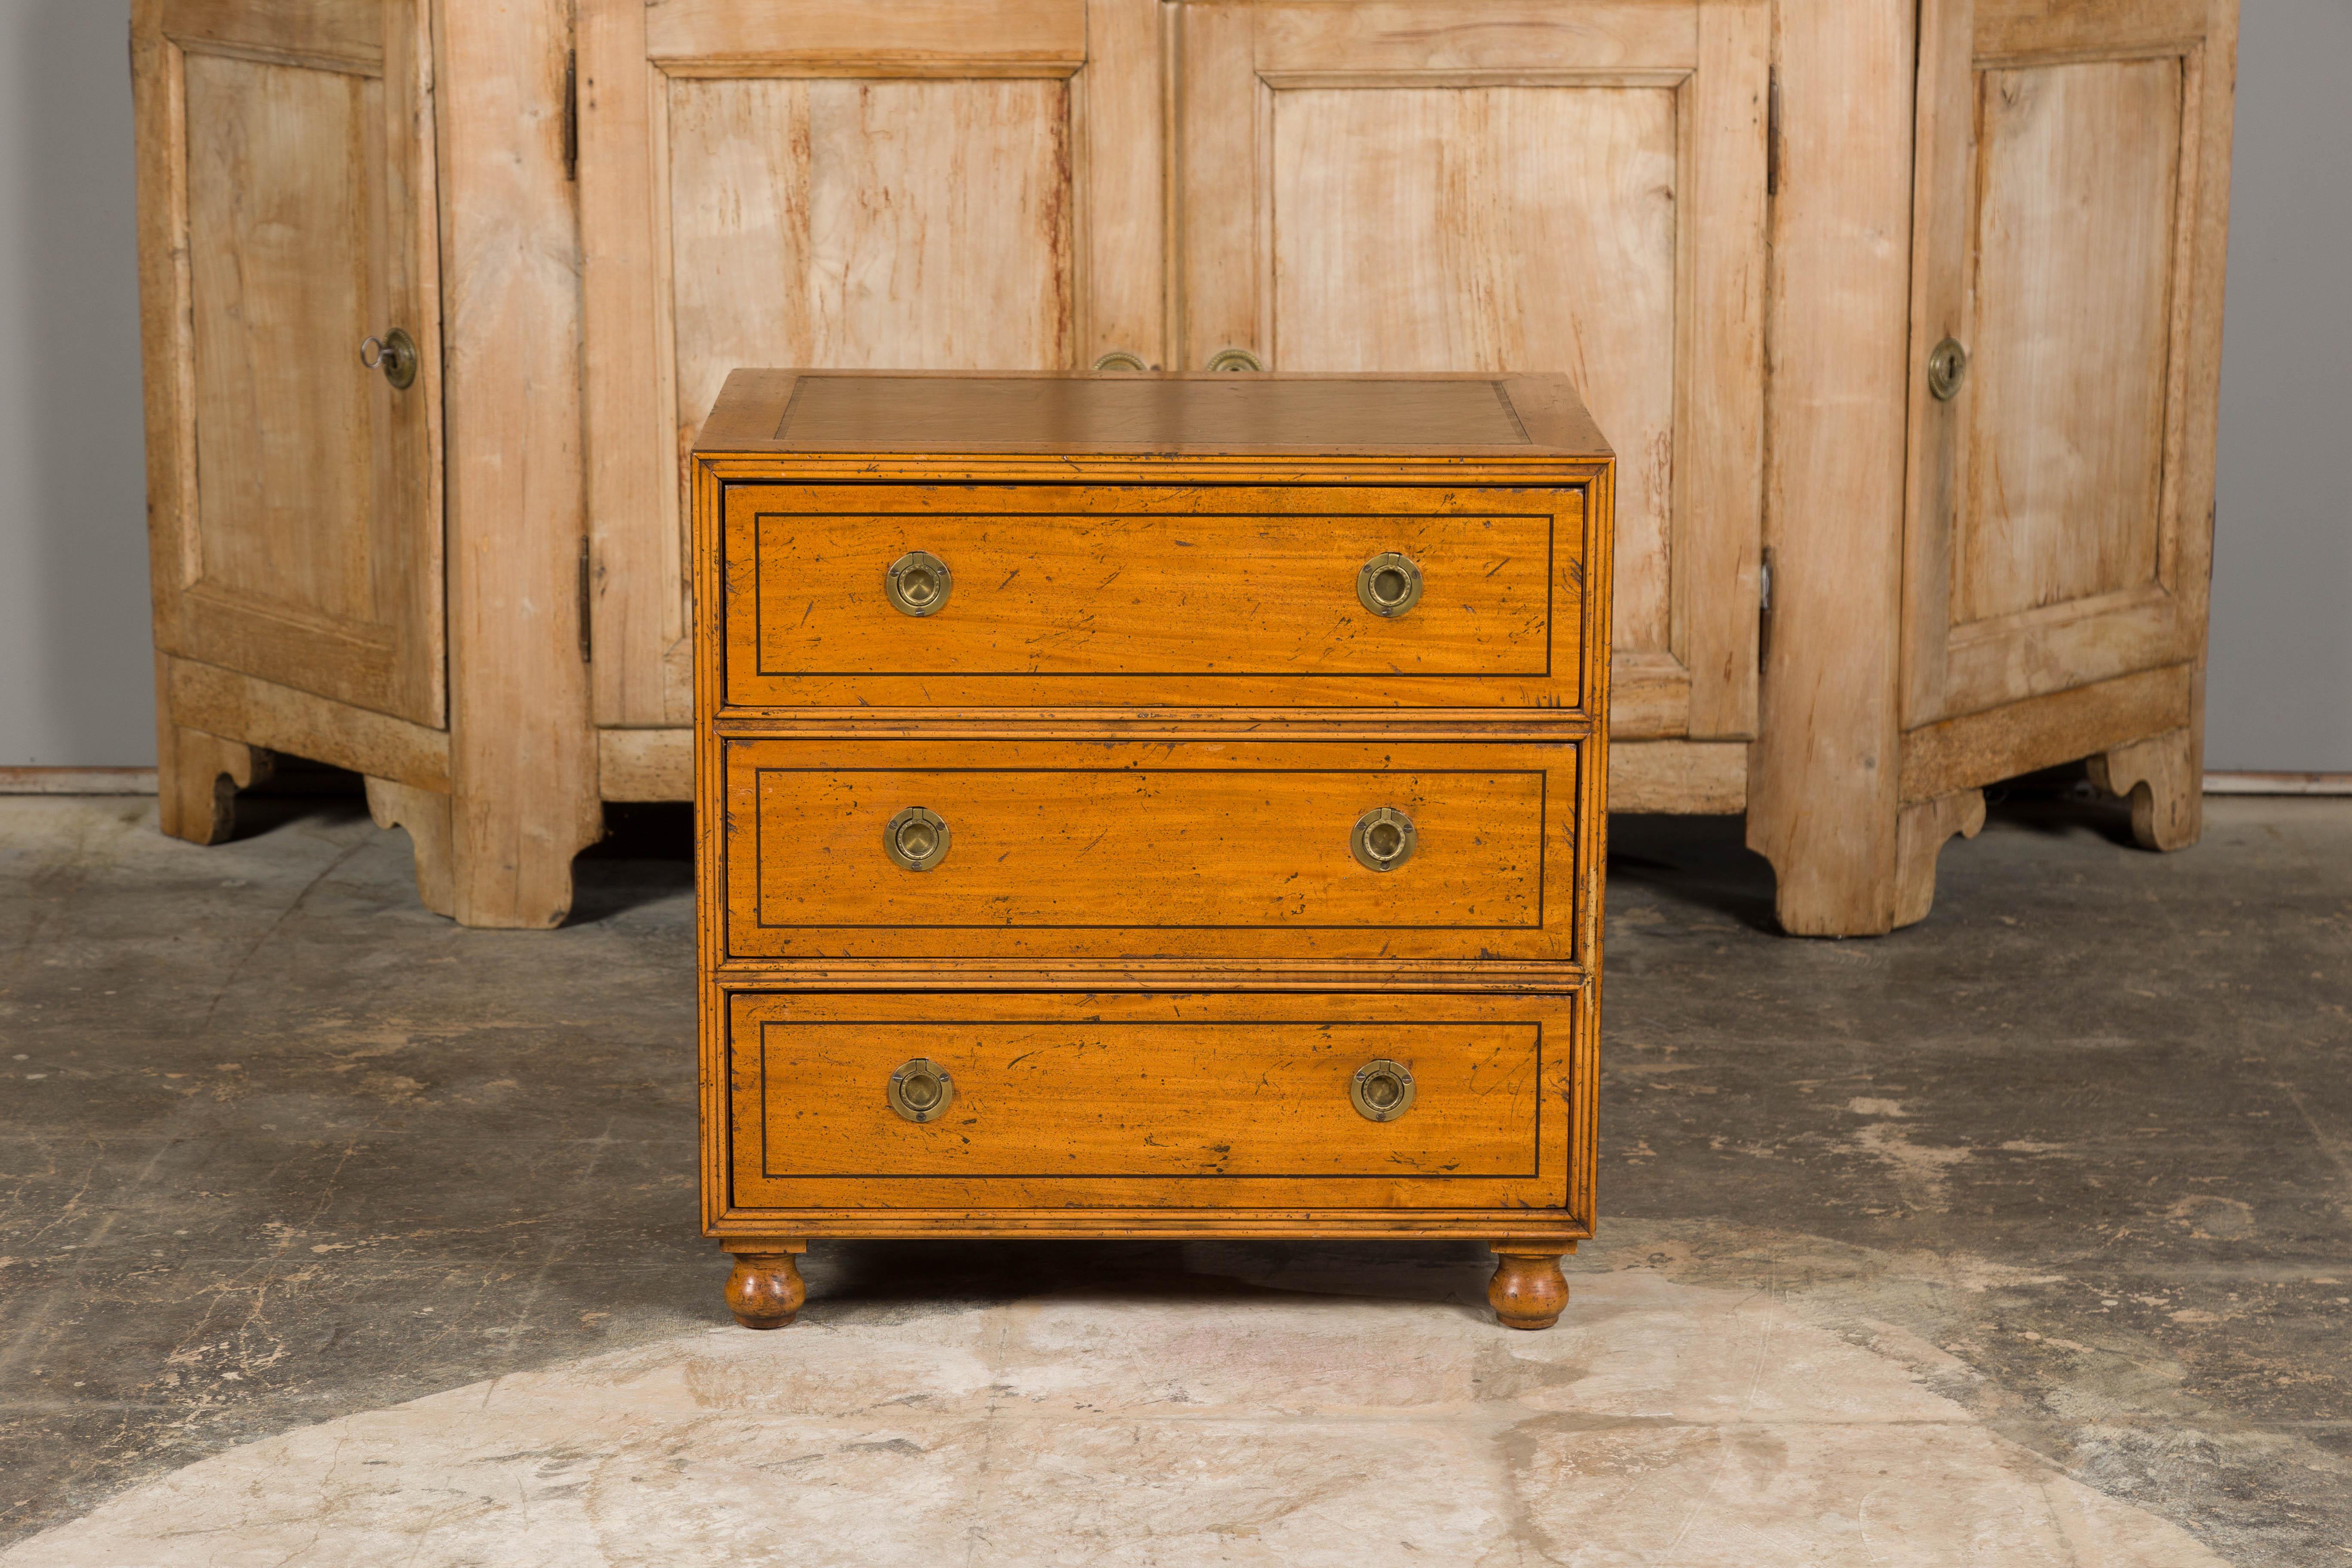 A Baker Furniture Company Campaign style mahogany chest from circa 1950 with three drawers and brass hardware. Crafted in the mid-20th century, this Campaign style mahogany chest by the renowned Baker Furniture Company, is a splendid representation